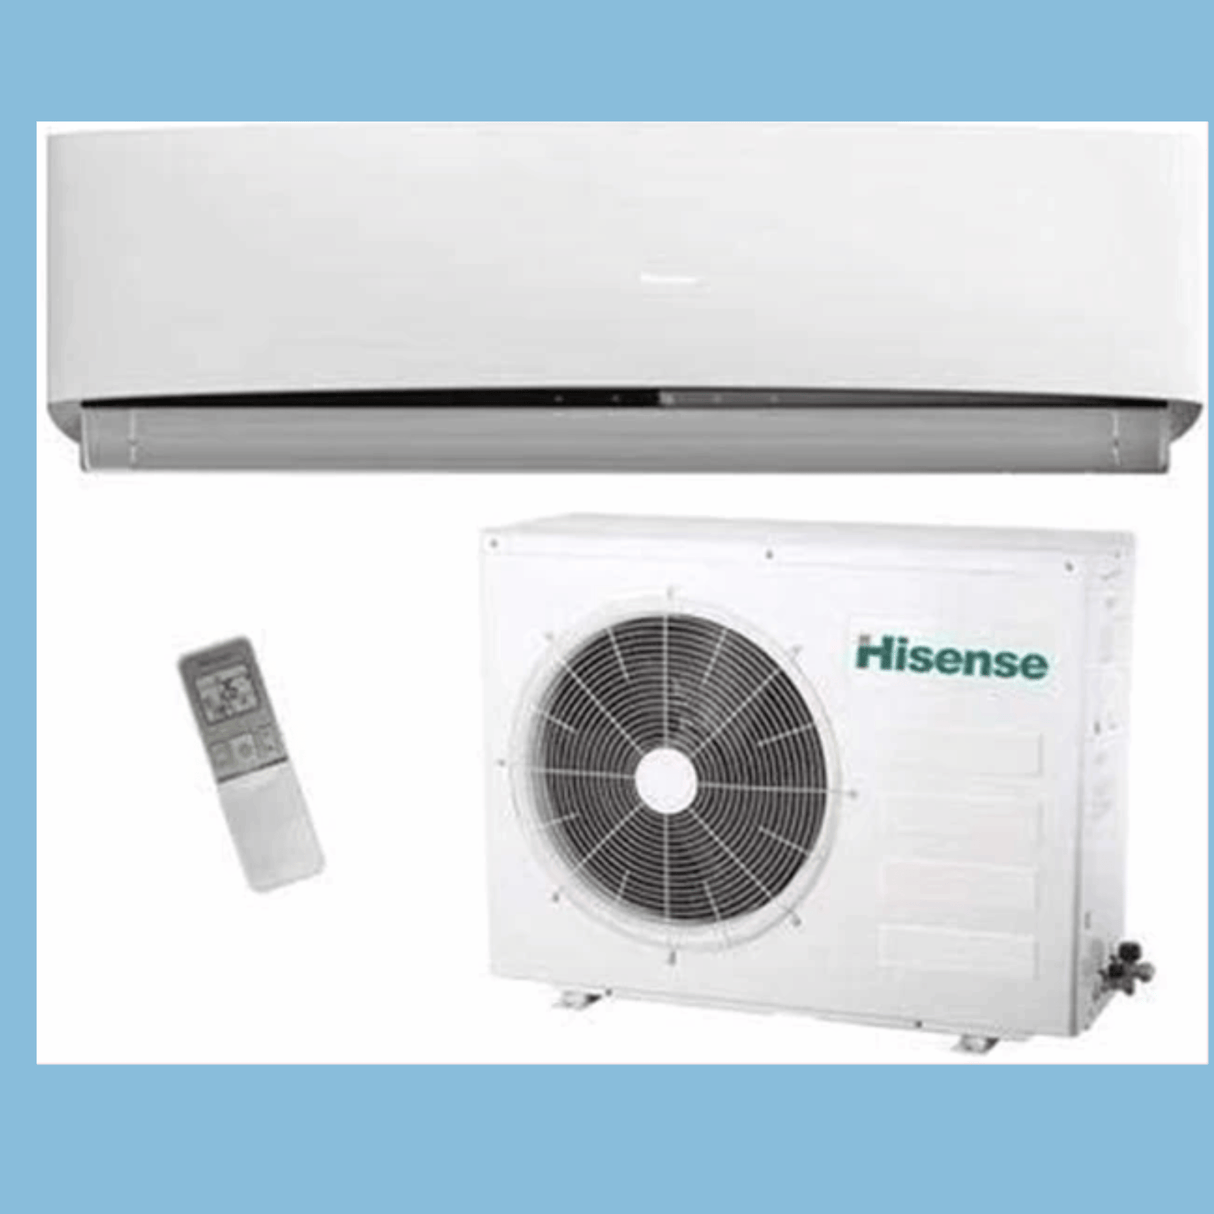 Hisense 12000 BTU Wall Split Air Conditioner with fast cooling, R410A Gas, Low Noise, 3m of Copper Pipe- AS-12HR4SVETE2/CR4SVDTG01